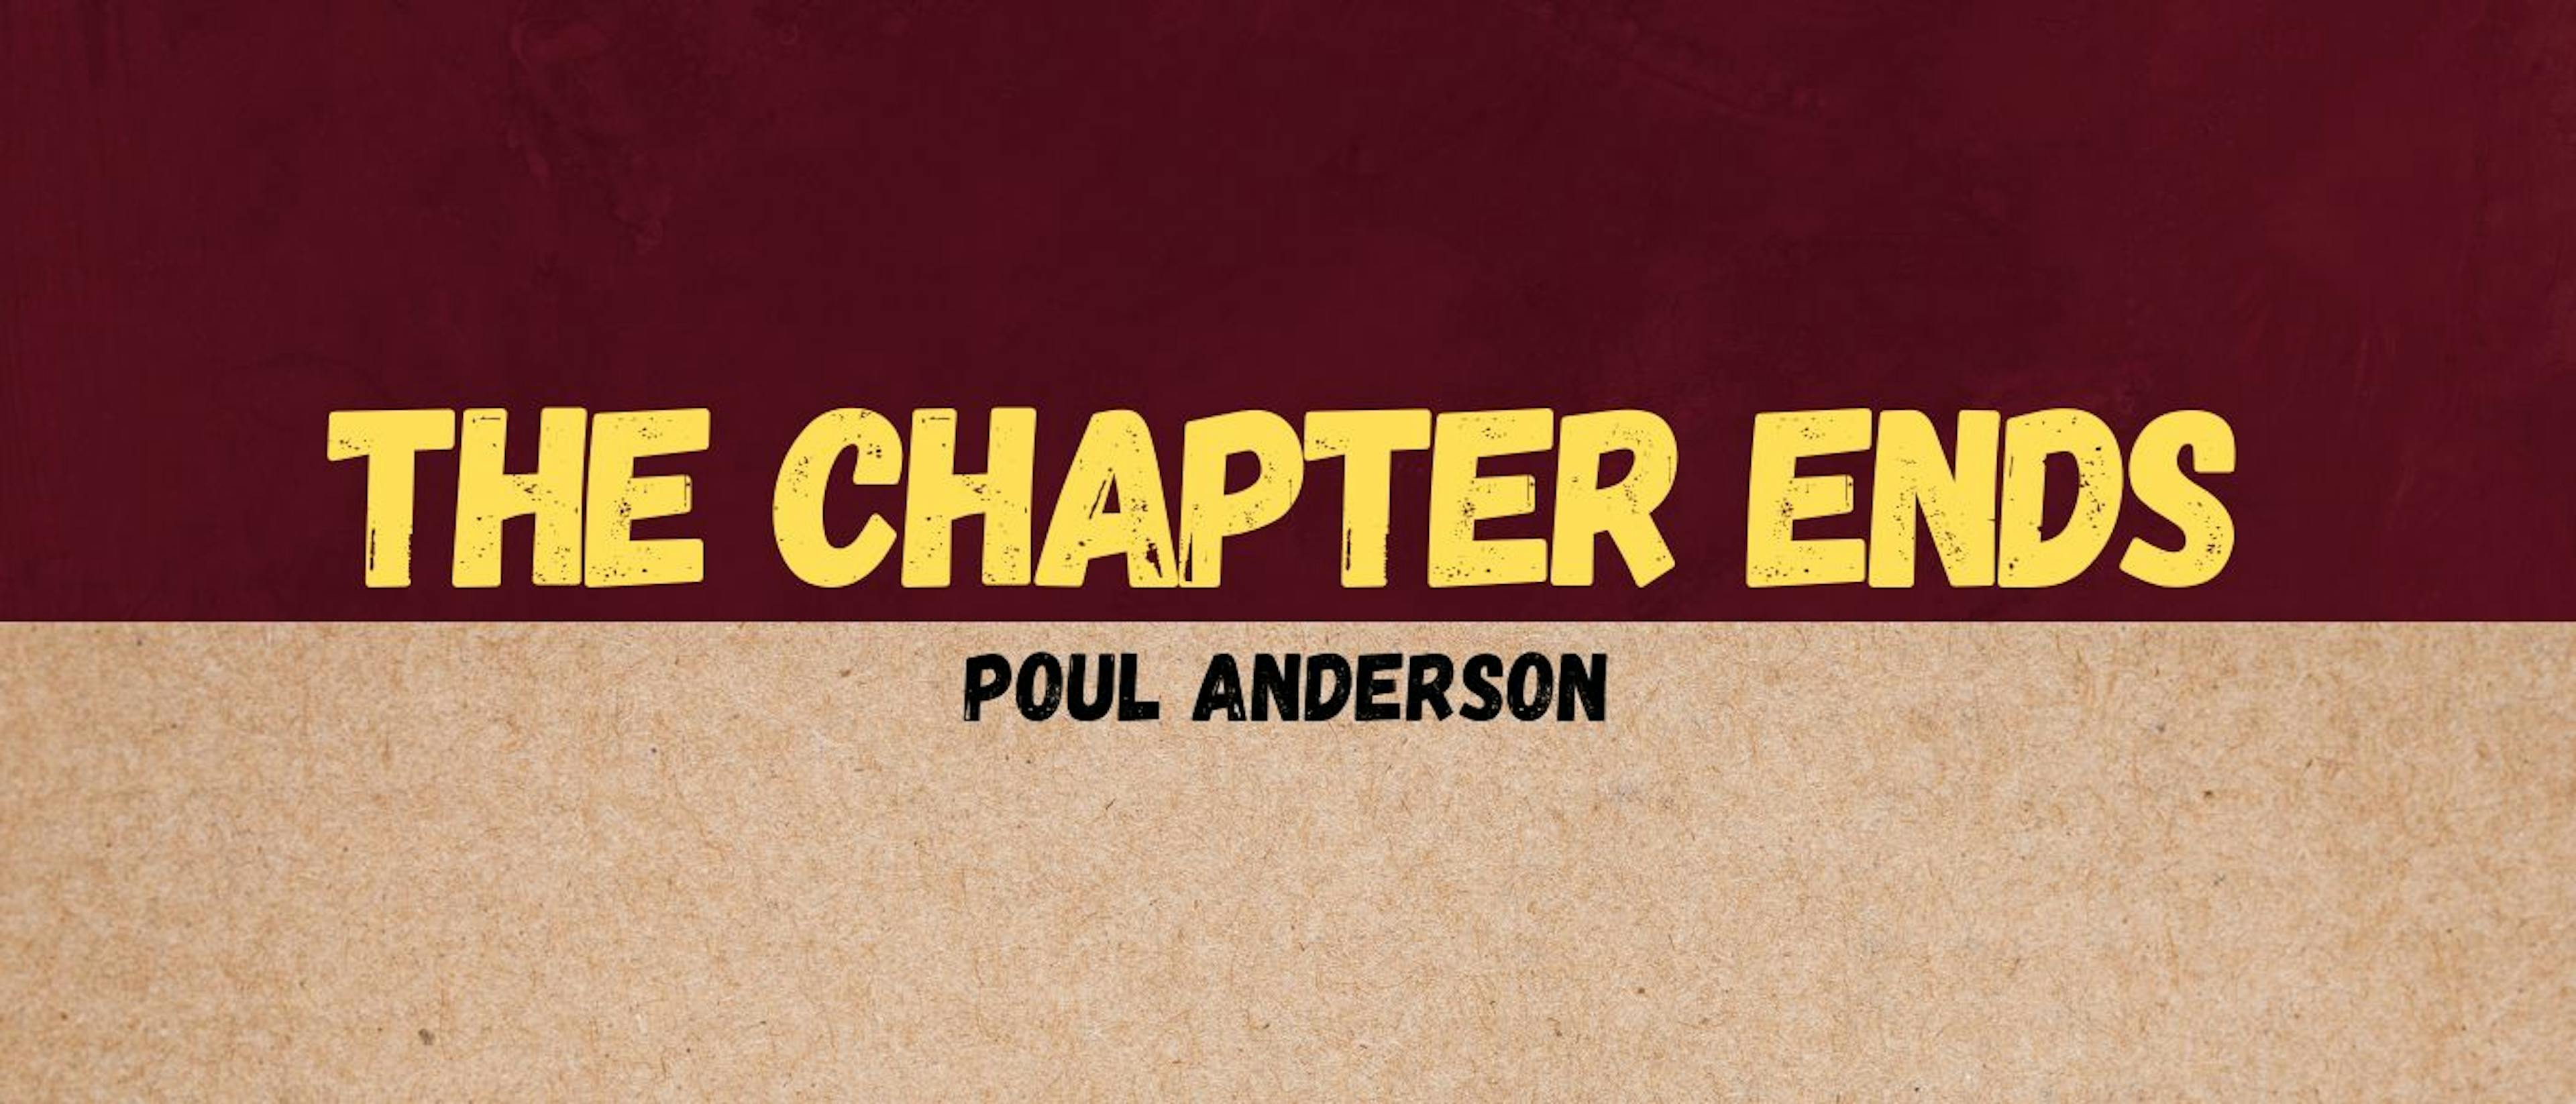 featured image - The Chapter Ends by Poul Anderson - Table of Links